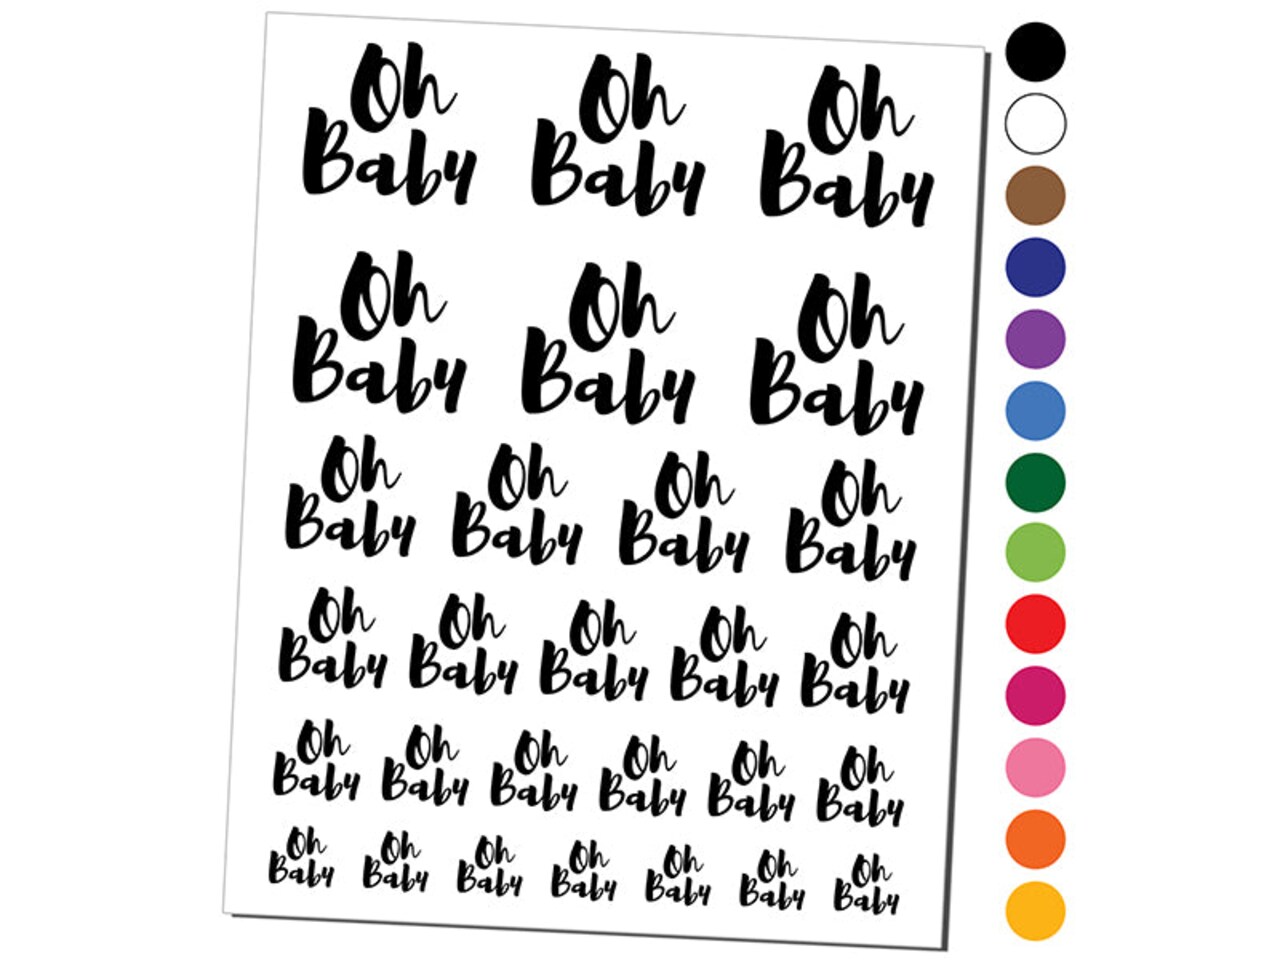 Oh Baby Script Shower Pregnancy Temporary Tattoo Water Resistant Fake Body Art Set Collection